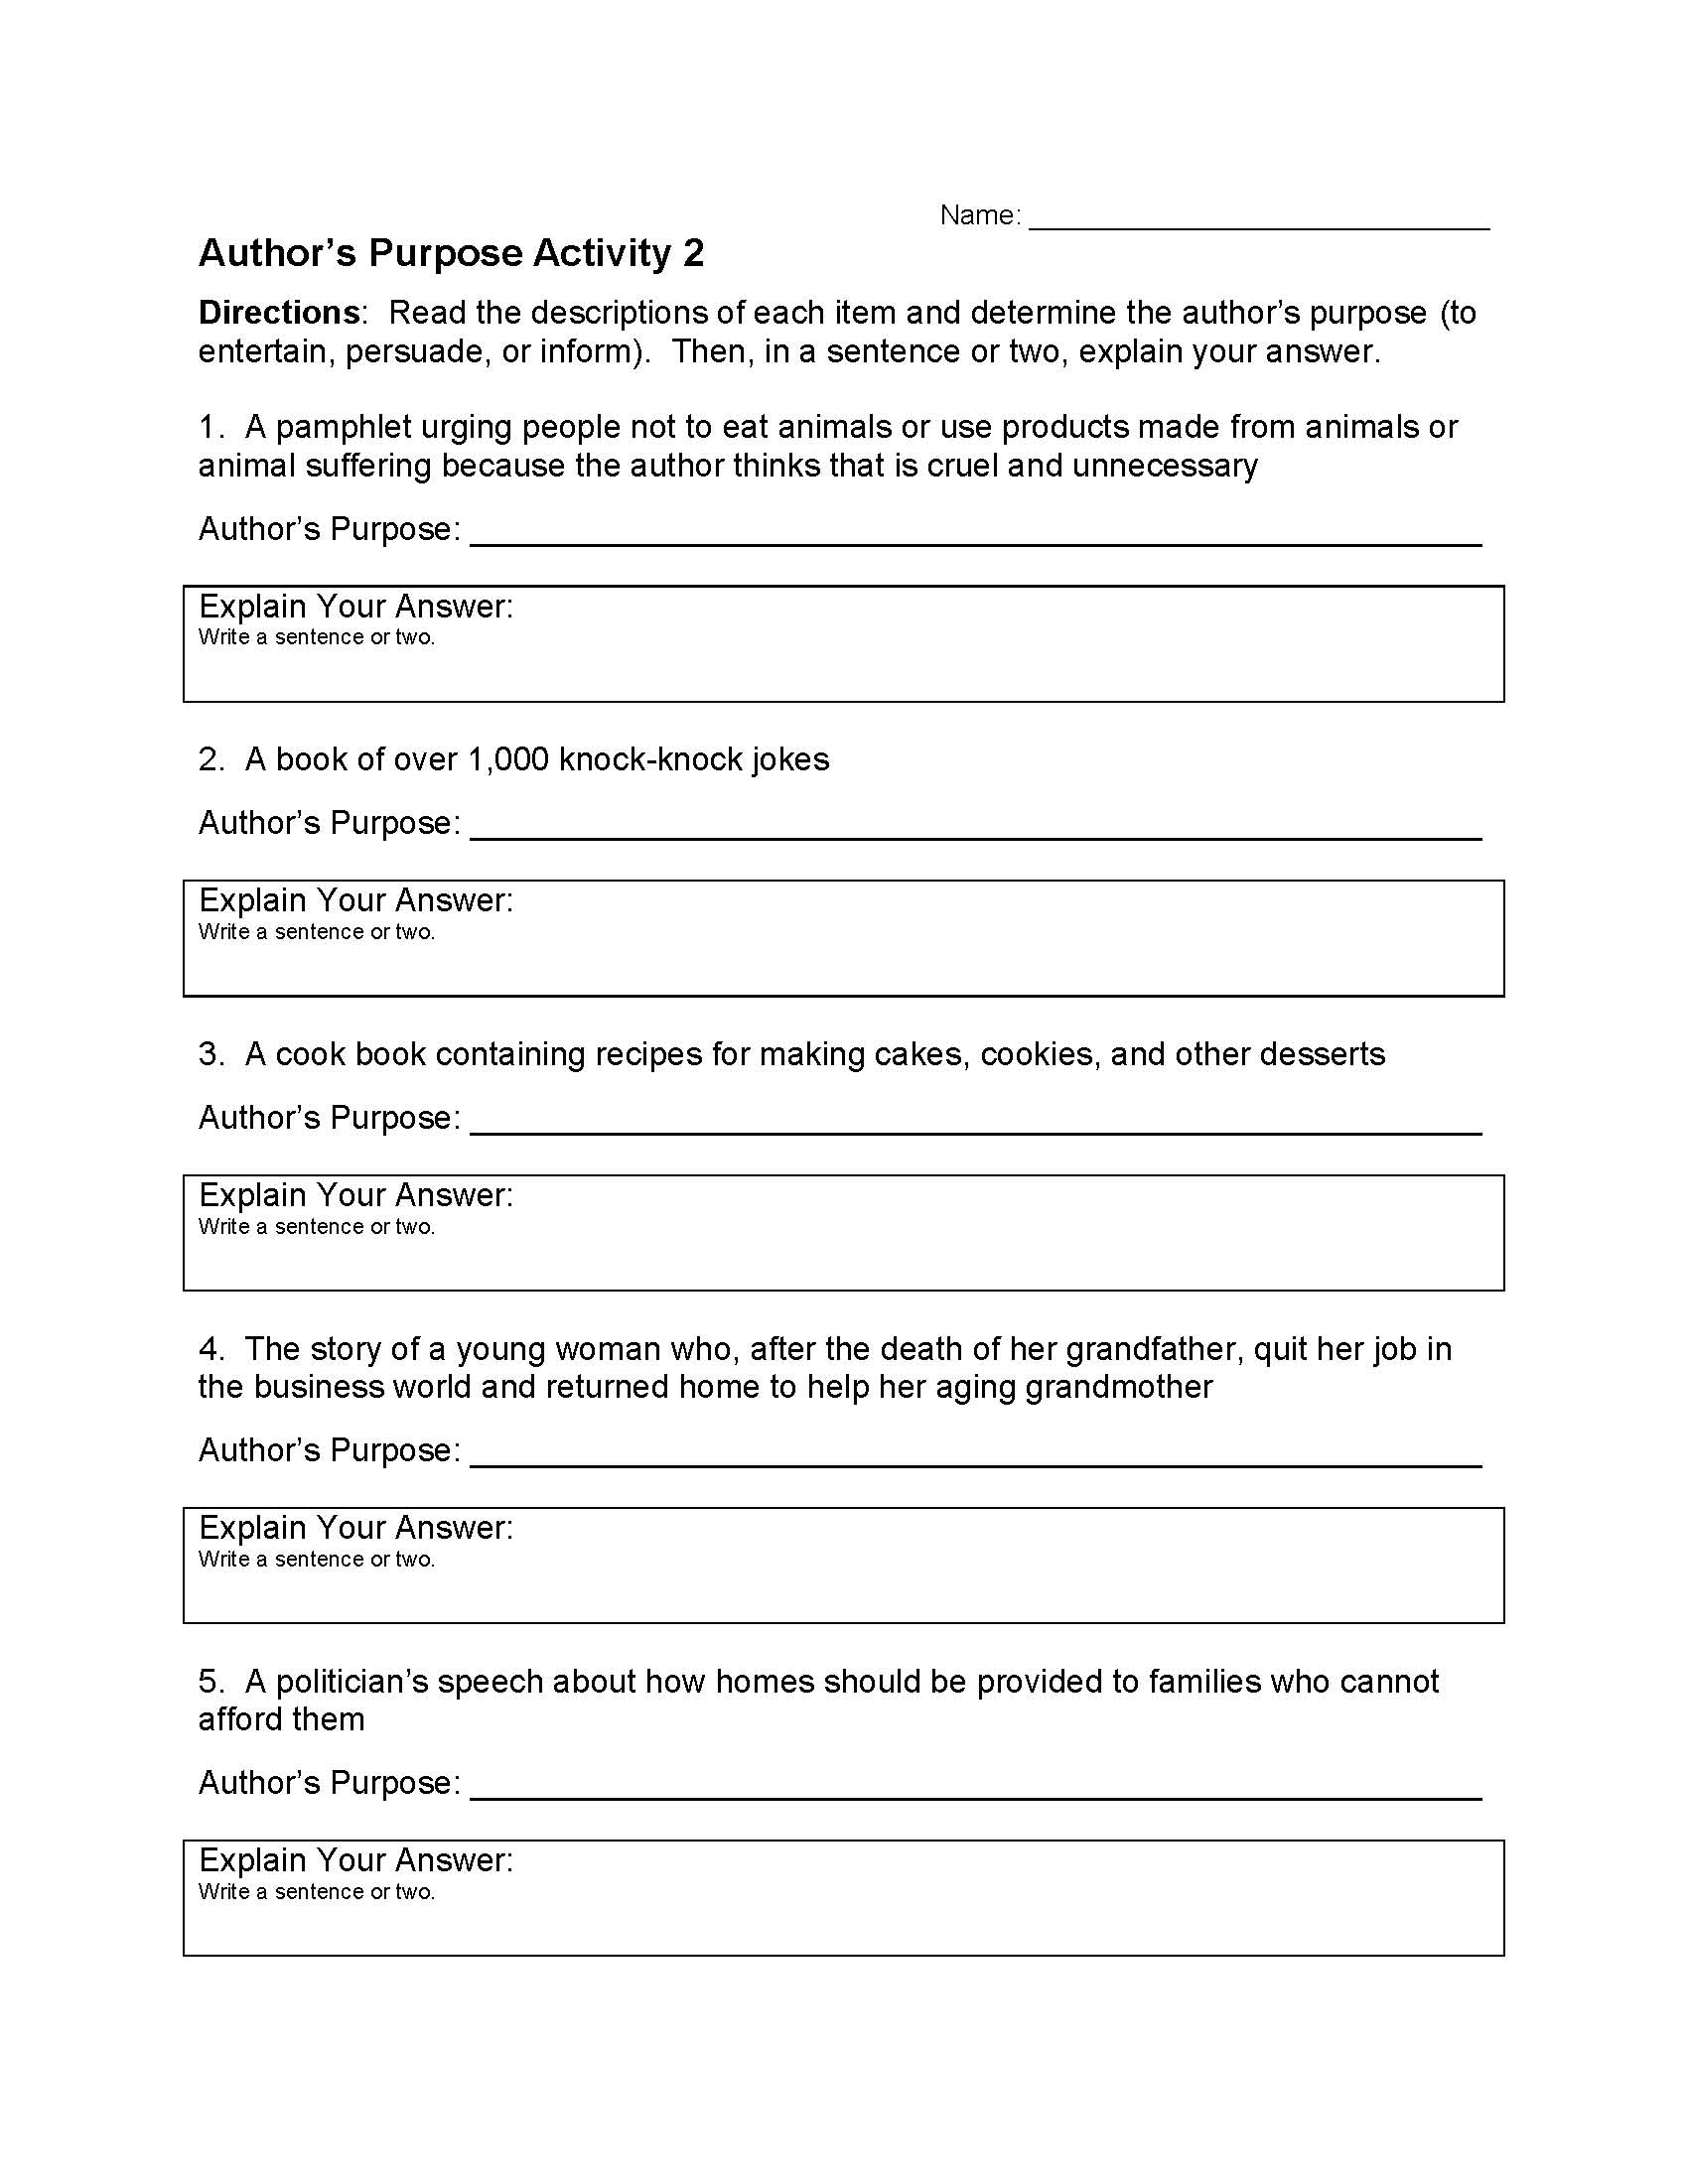 author-s-purpose-worksheet-2-preview